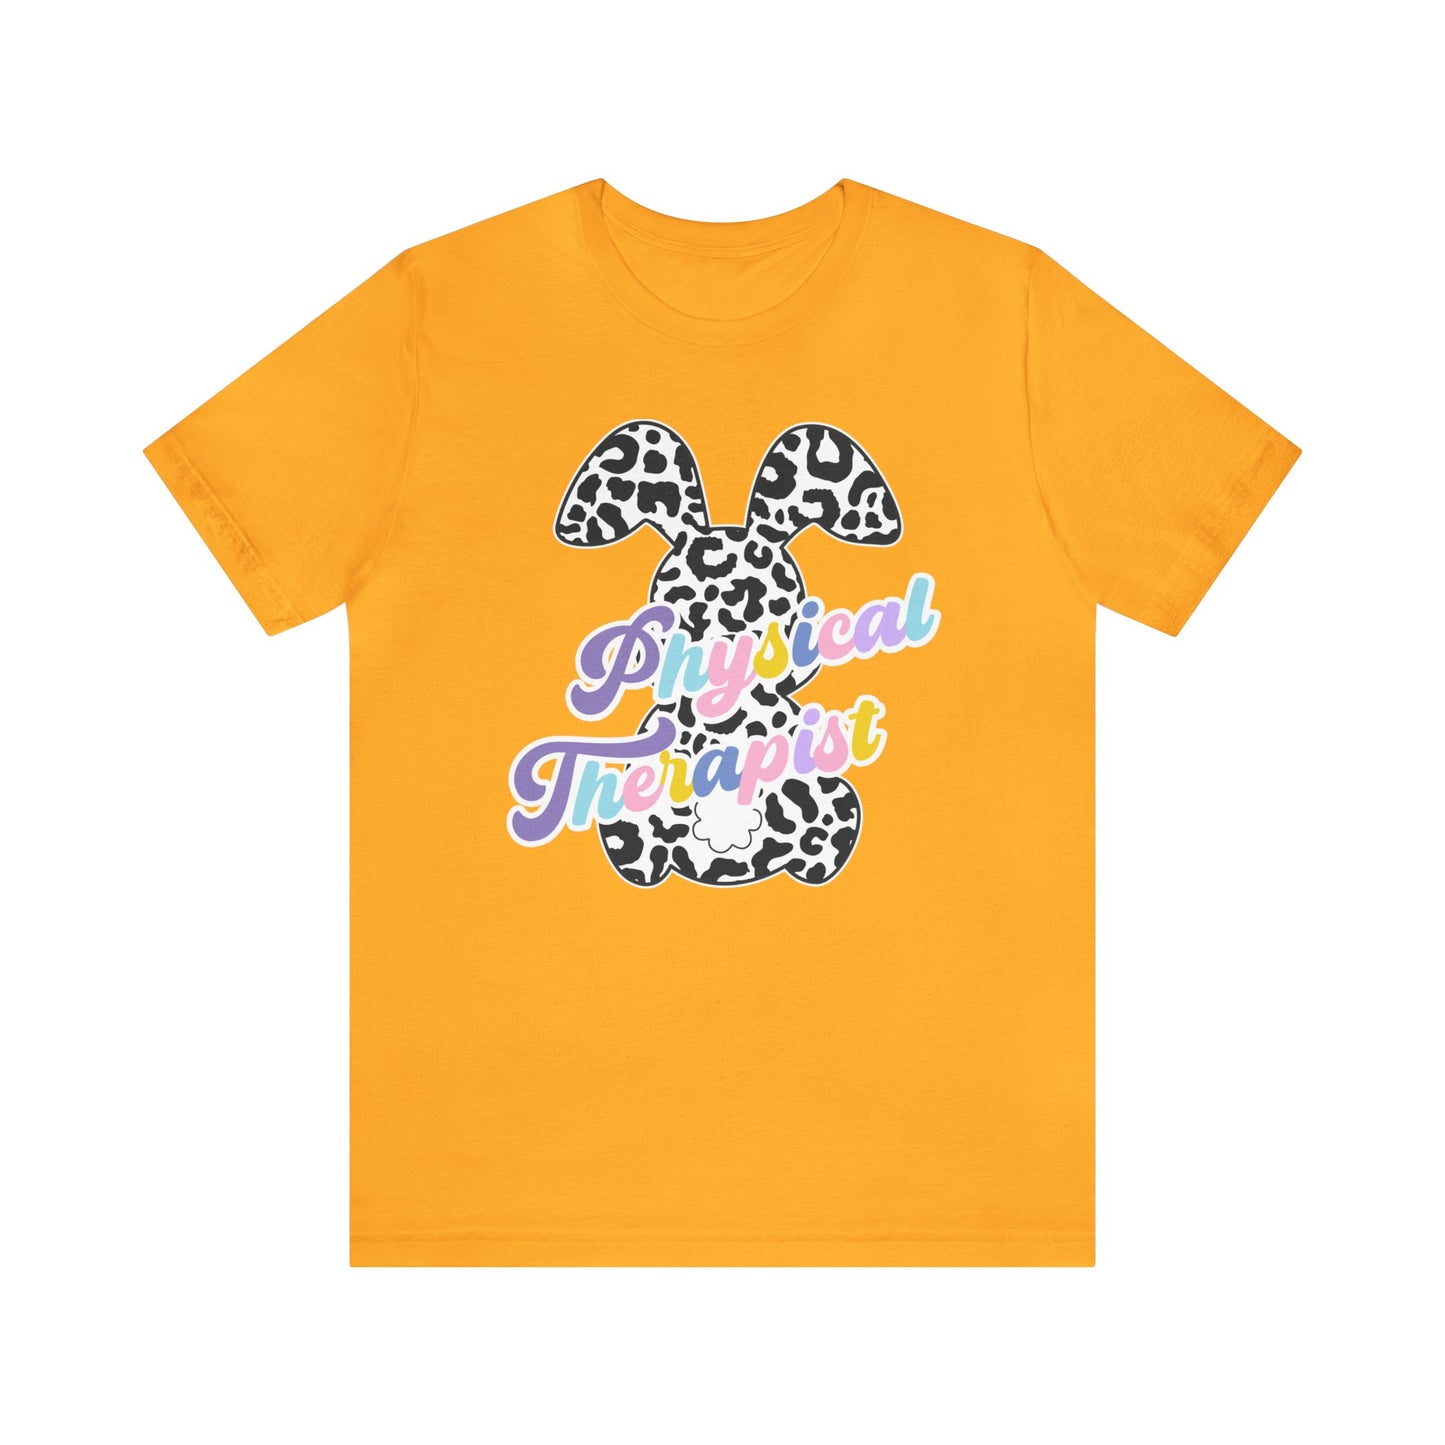 Happy Easter Physical Therapist Shirt, Easter Shirt, Bunny Shirt, Happy Easter Shirt, Easter Bunny Shirt, Therapist Shirt